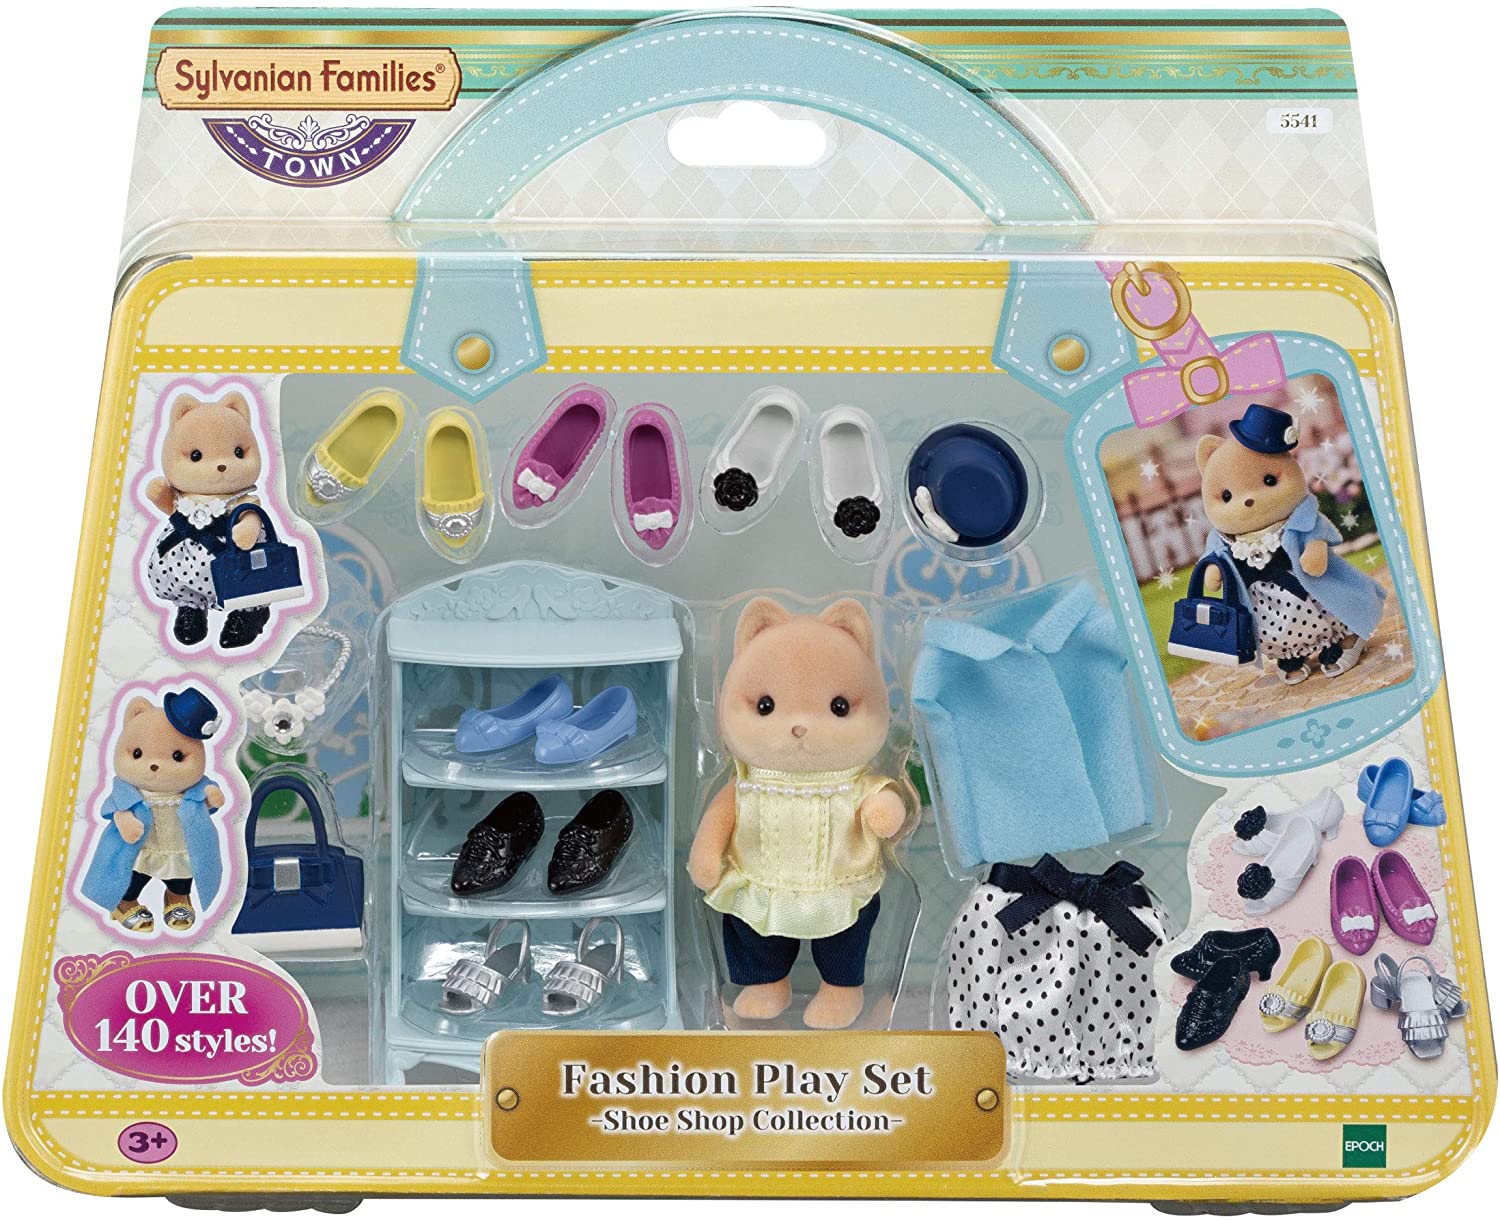 New Calico Cat and Families House, 2021: toy Midnight Panda Surprise Sylvanian more! family, Critters Shop, Spooky family Shoe sets